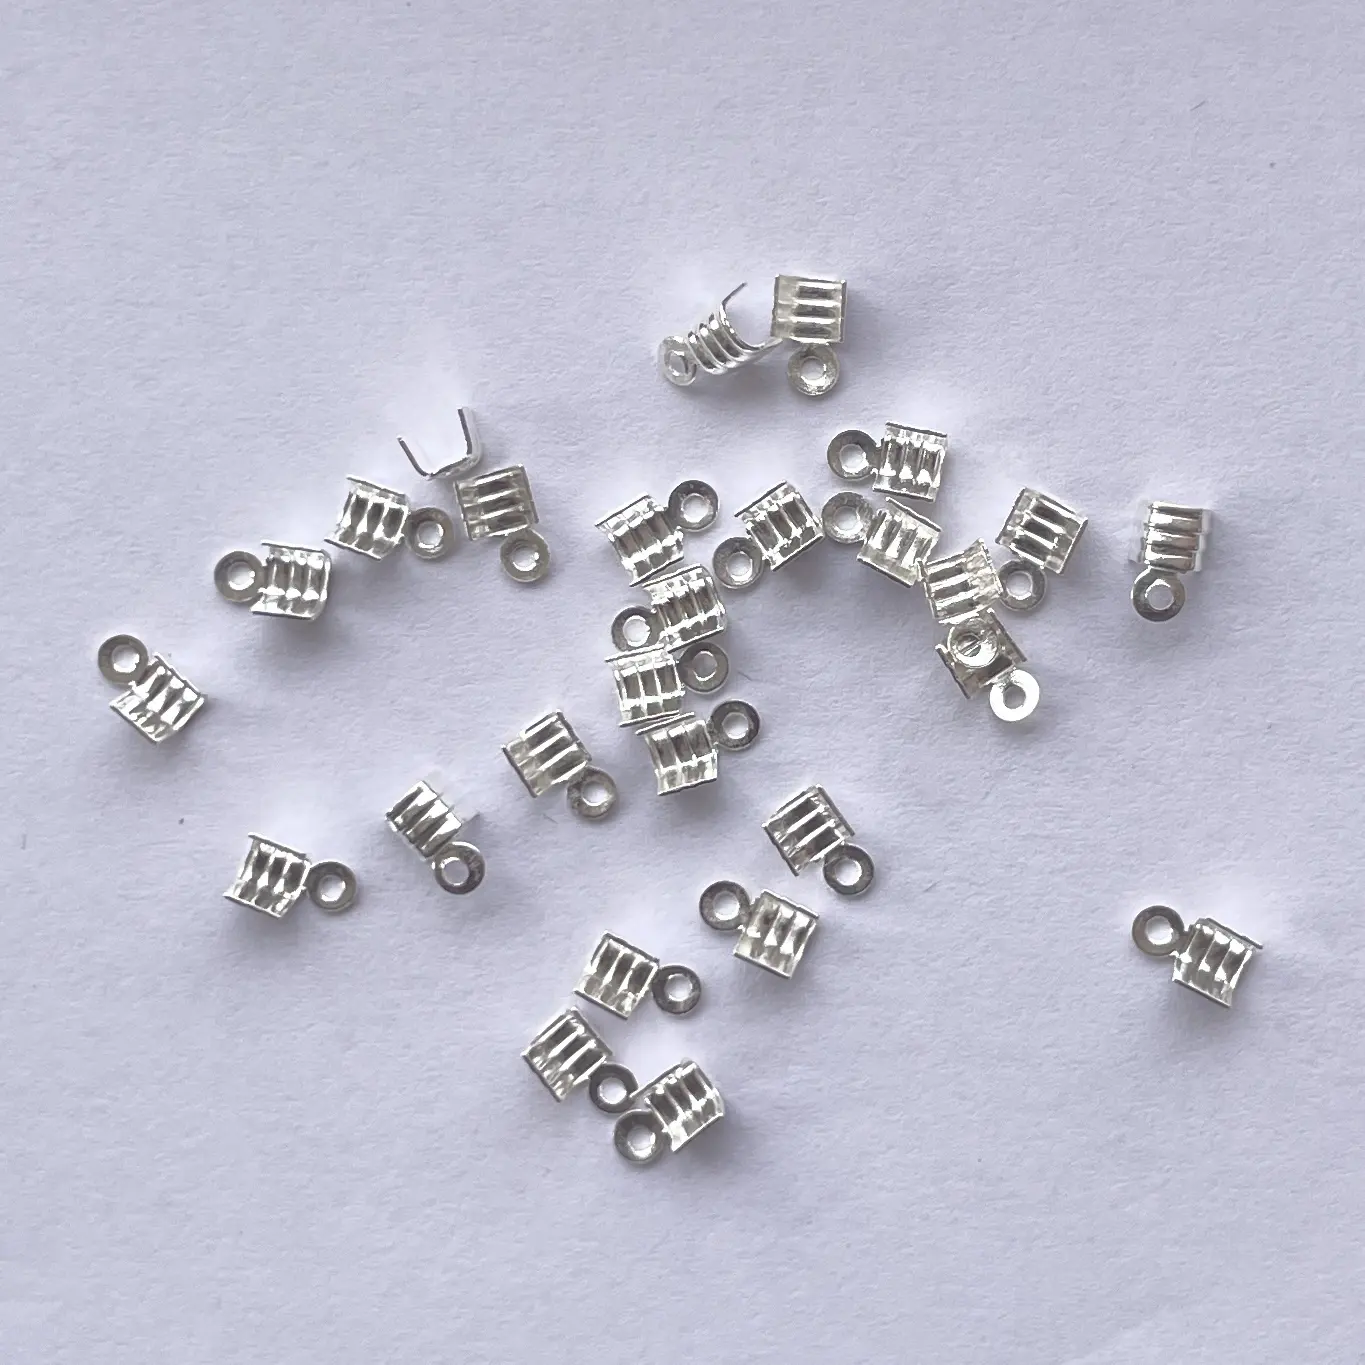 4mm 925 Sterling Silver Leather Cord Strip Clasp Lock End Crimp Bead Cords Clip Connectors for Jewelry Making Findings Findings